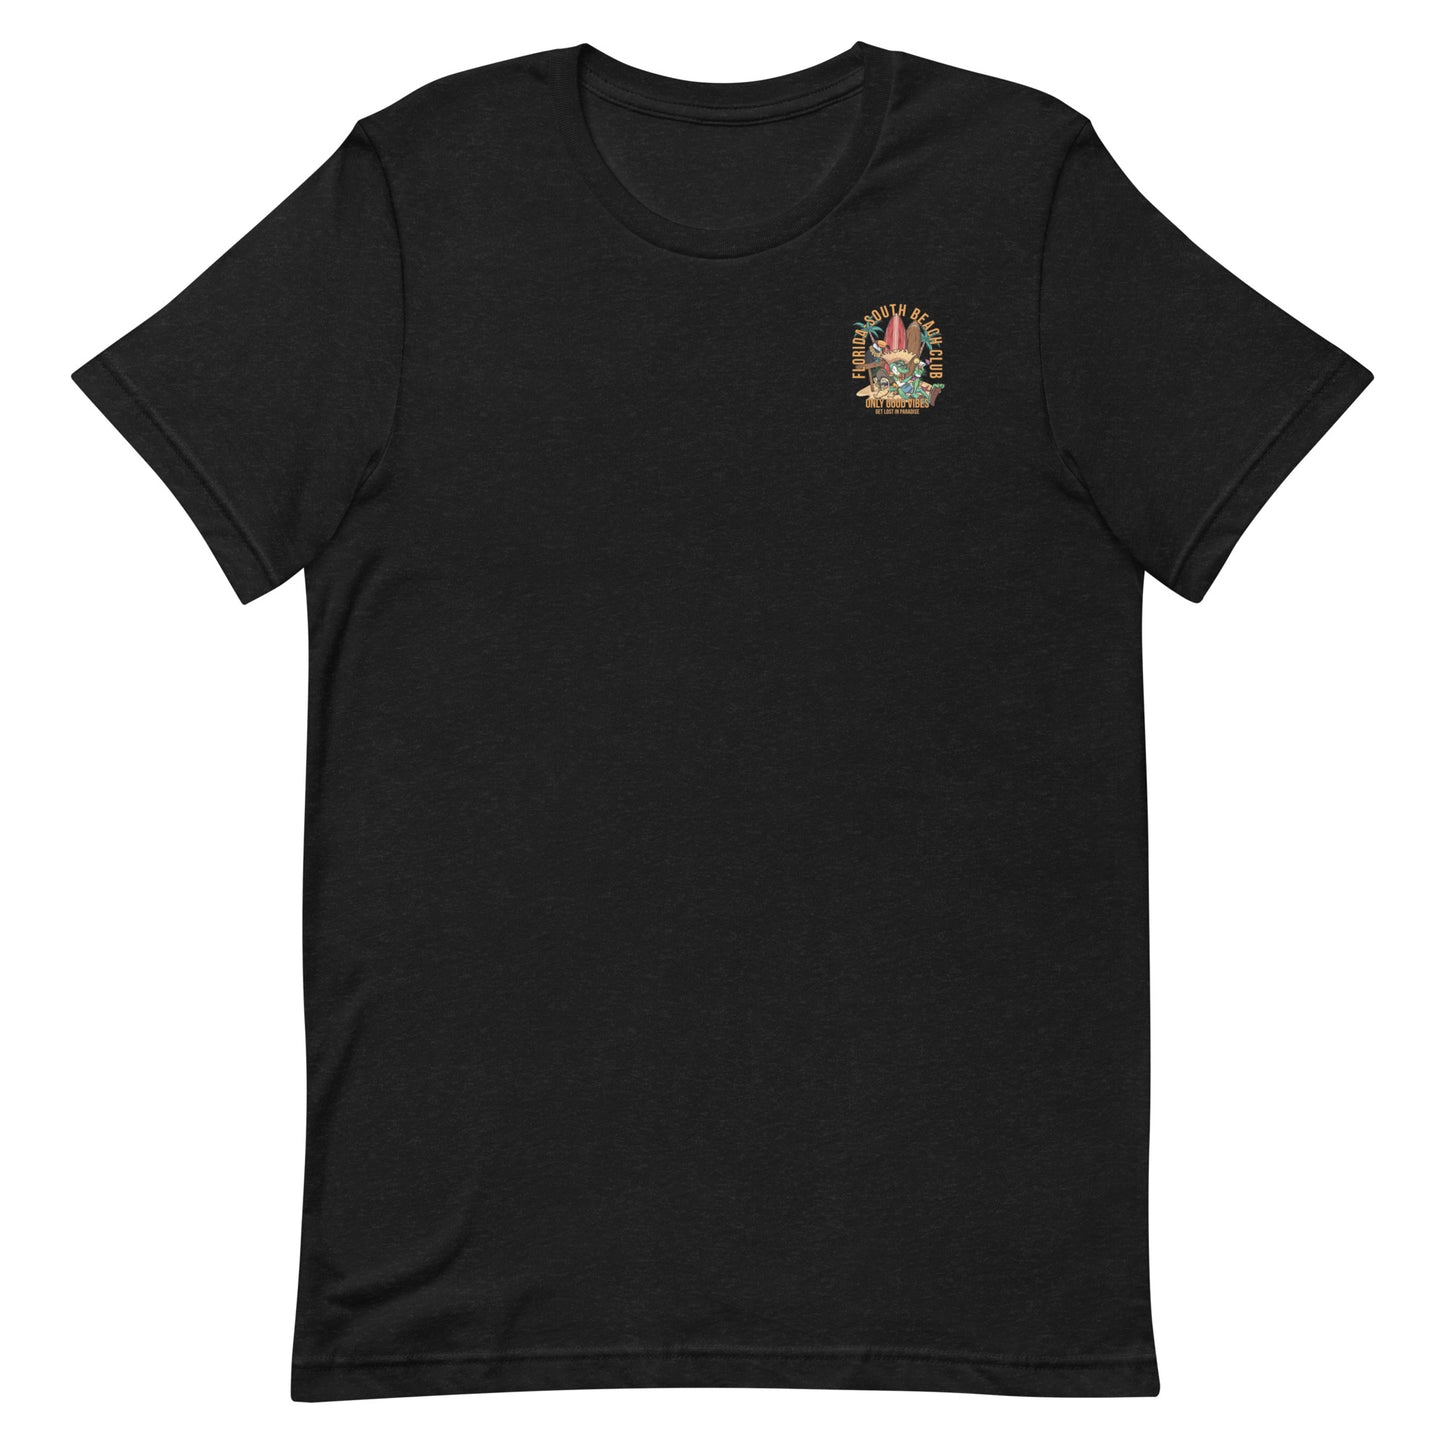 Lost in Paradise Unisex t-shirt